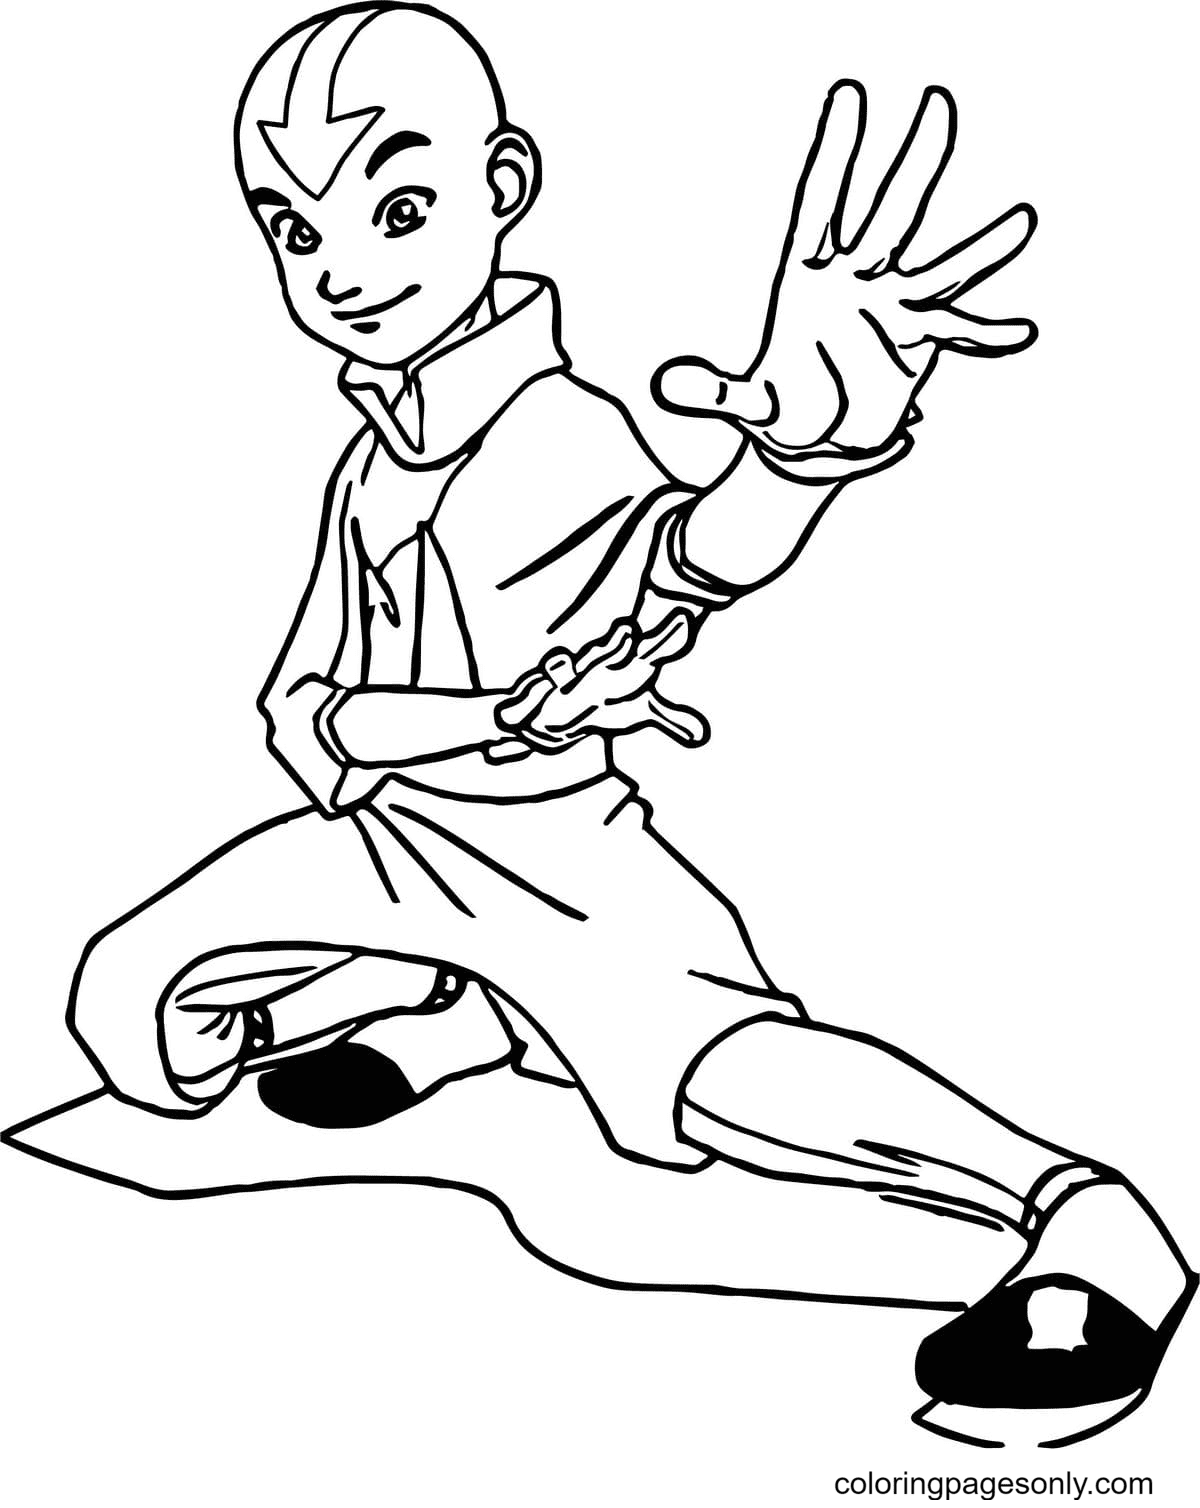 Aang In Training Coloring Pages